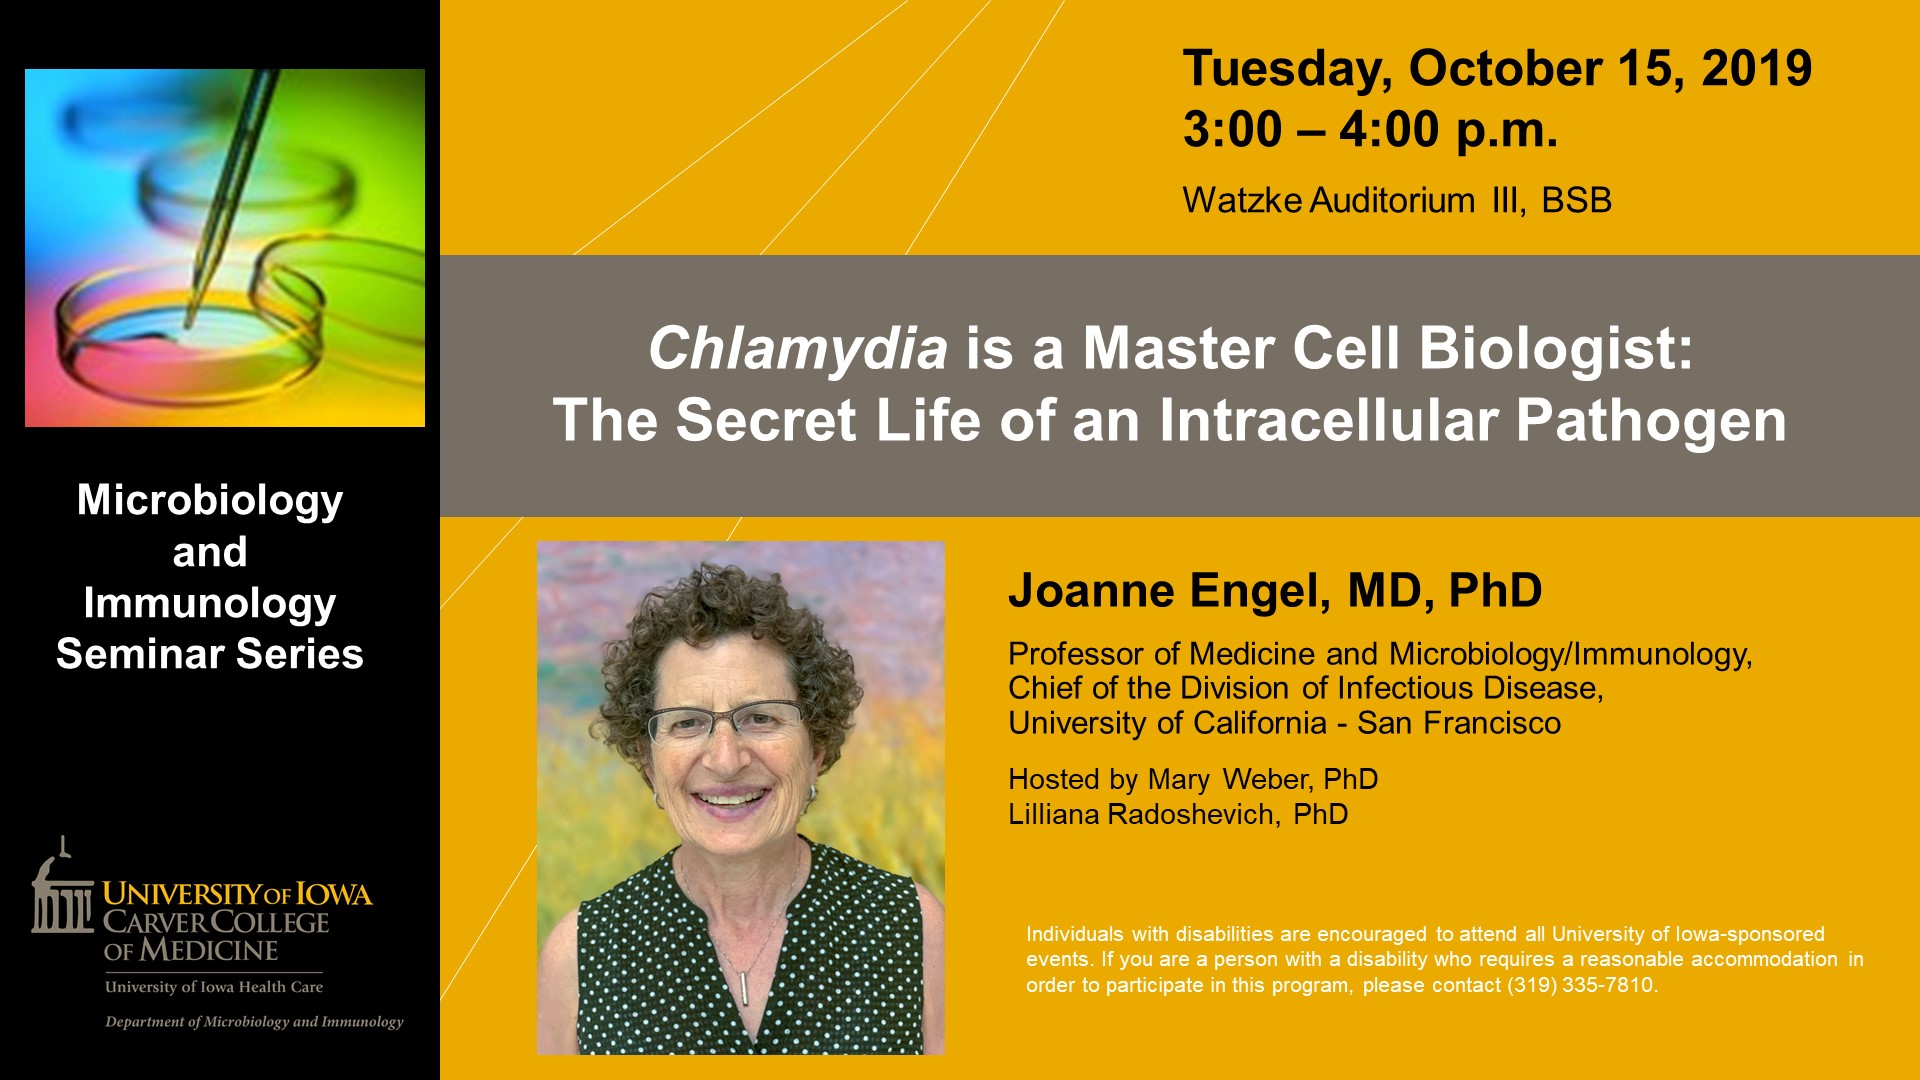 Microbiology and Immunology Seminar: Dr. Joanne Engel, MD, PhD promotional image